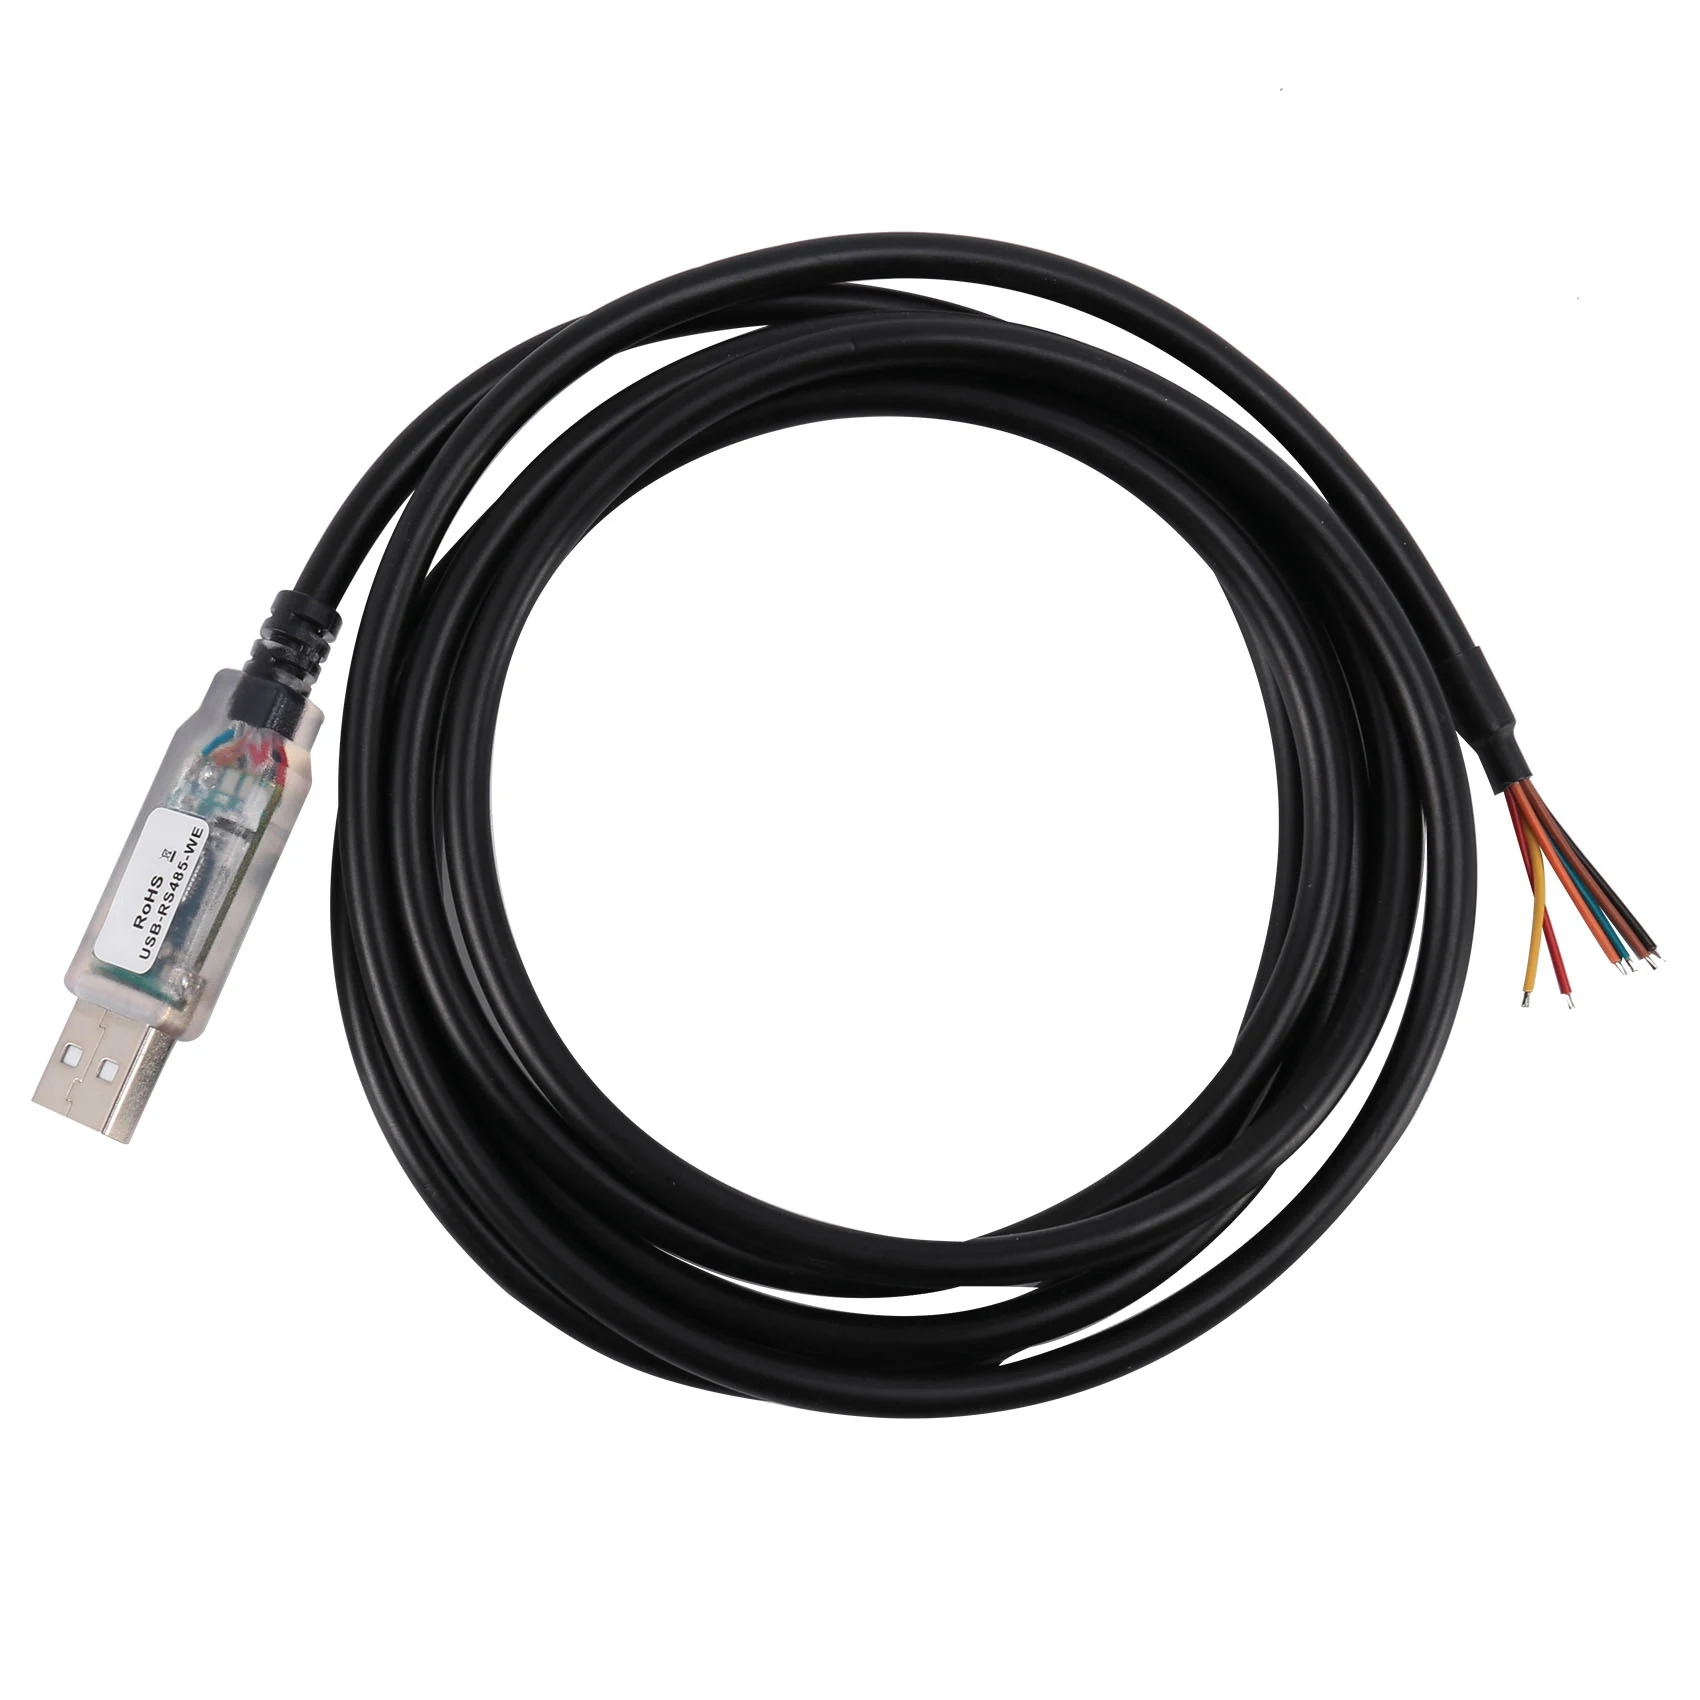 

1.8M Long Wire End,Usb-Rs485-We-1800-Bt Cable,Usb To Rs485 Serial For Equipment, Industrial Control, Plc-Like Products